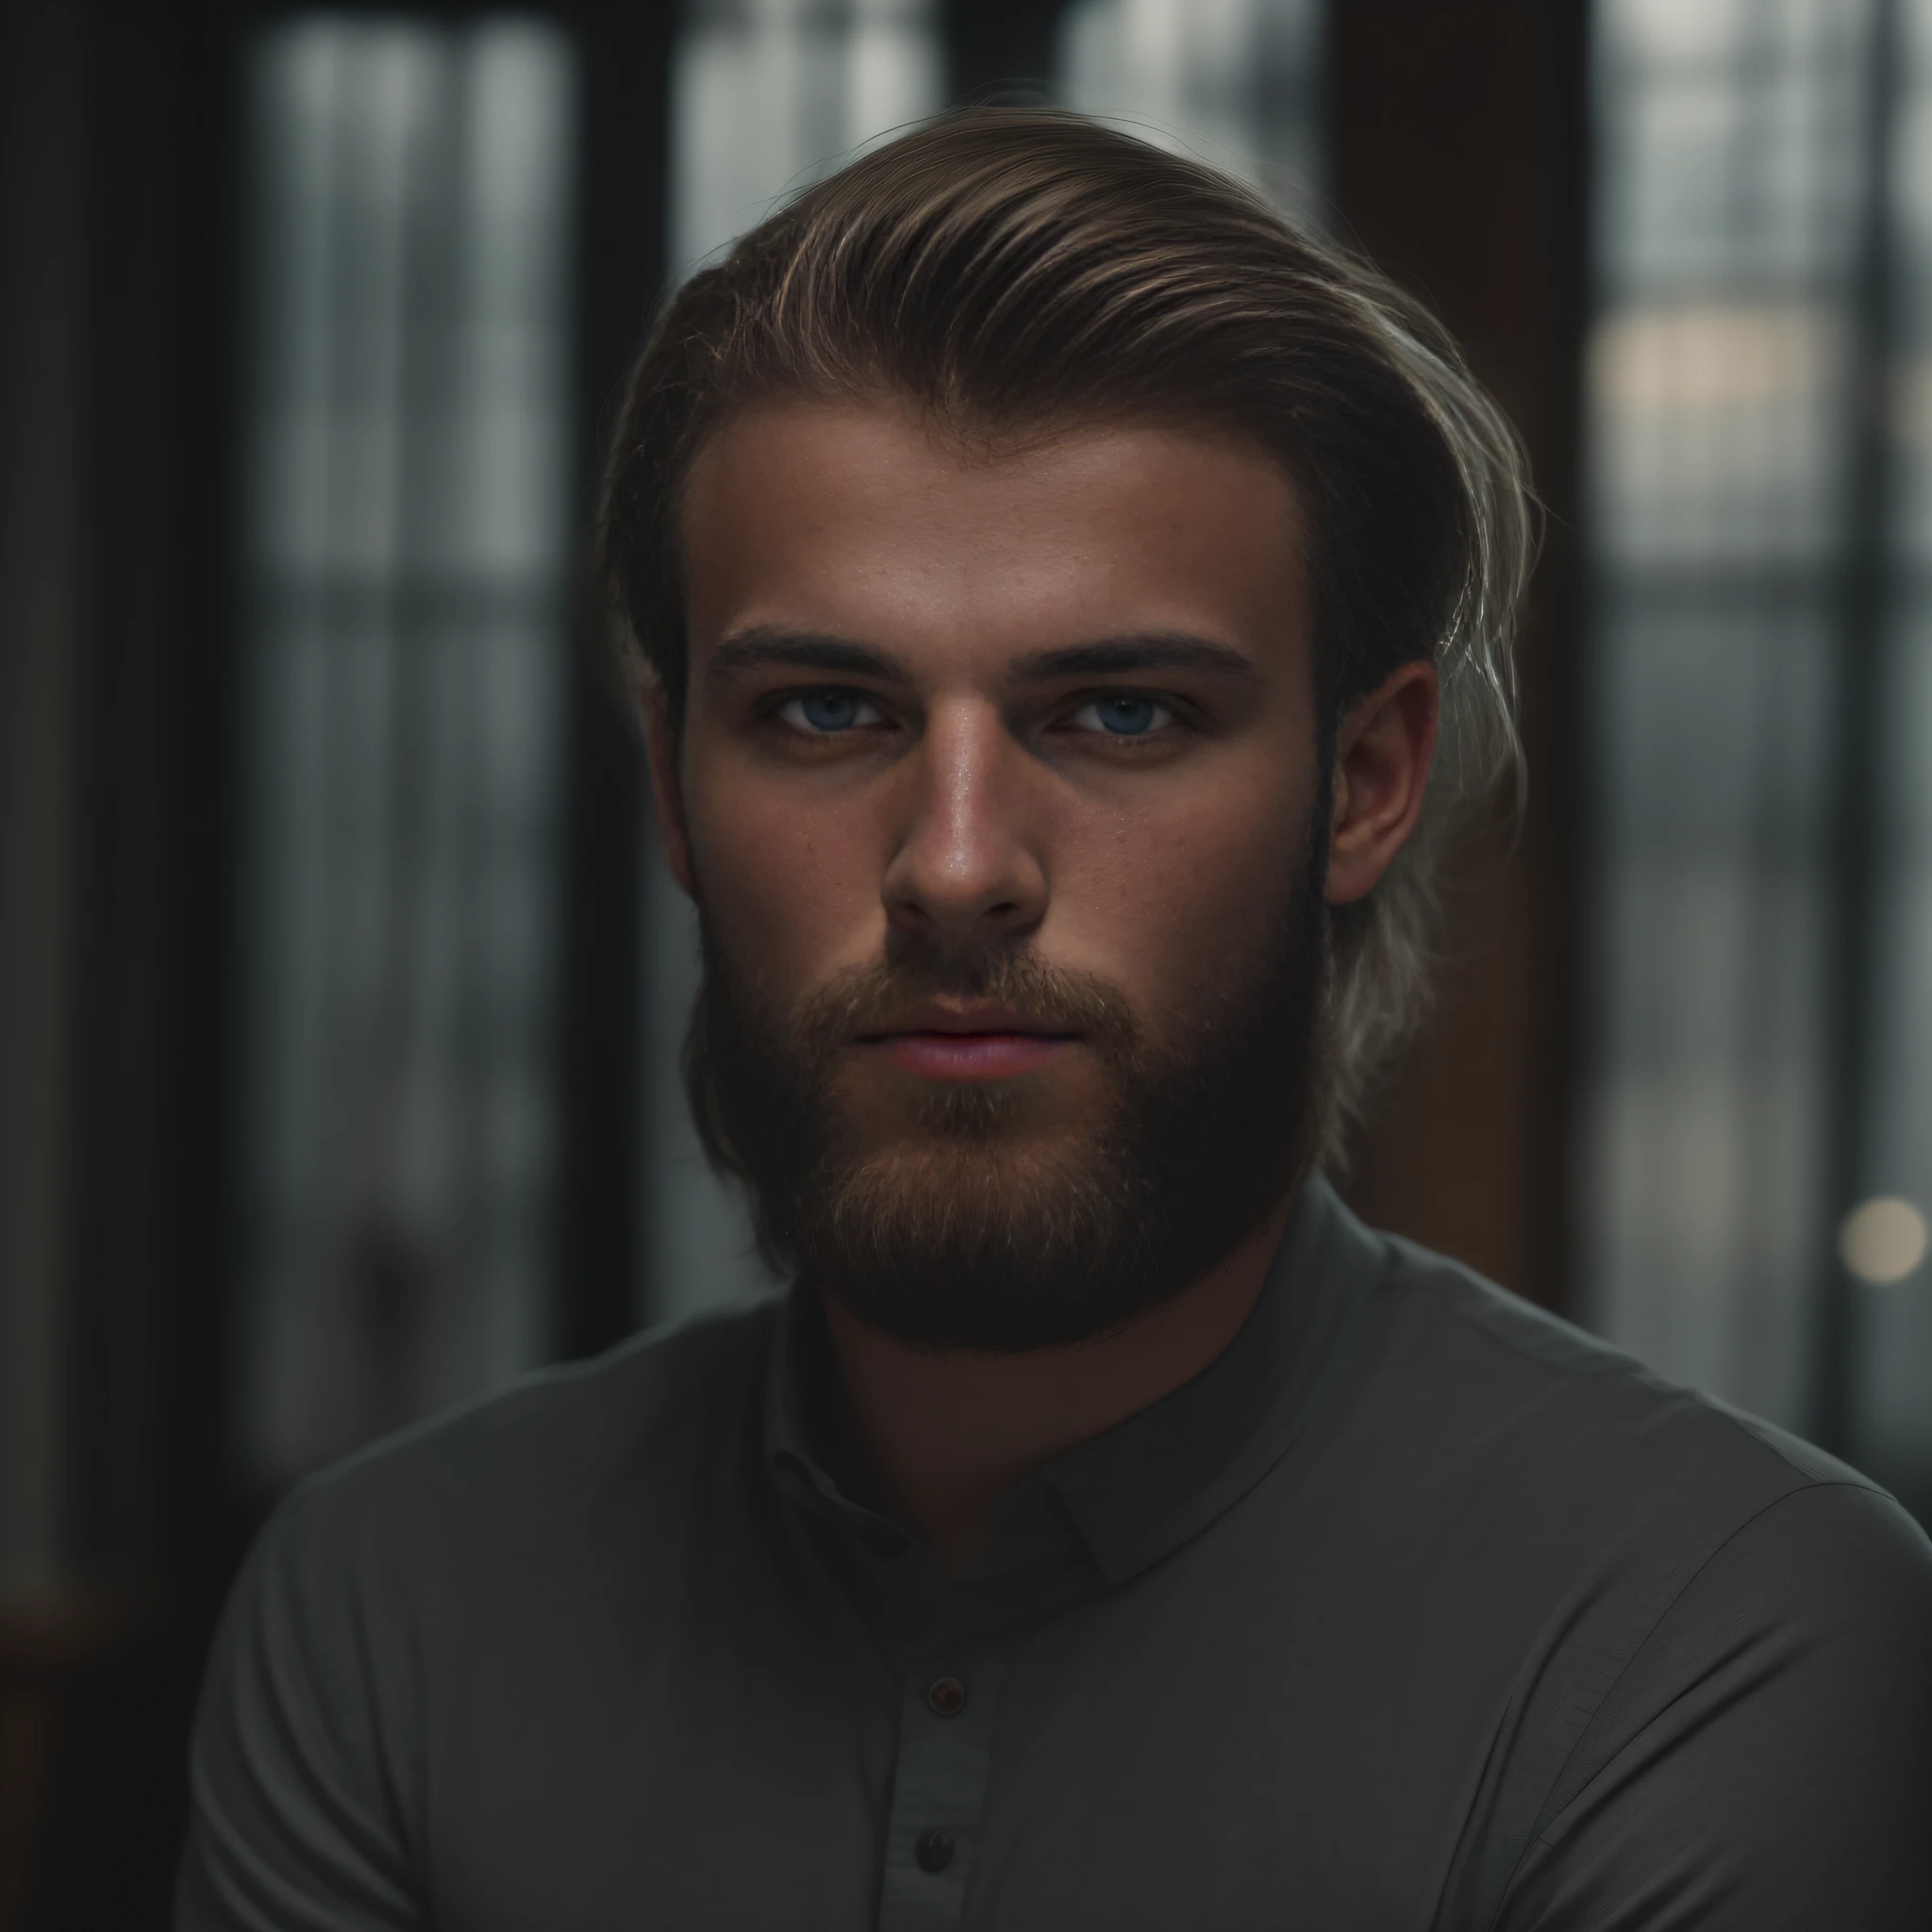 A 23-year-old man from Denmark, masculine, bearded, full beard, role model, fully body, elegant pose, Very beauthful, looking-into-camera, detailled image, uhd, 8K, well-lit, grain of film, perfect  lighting